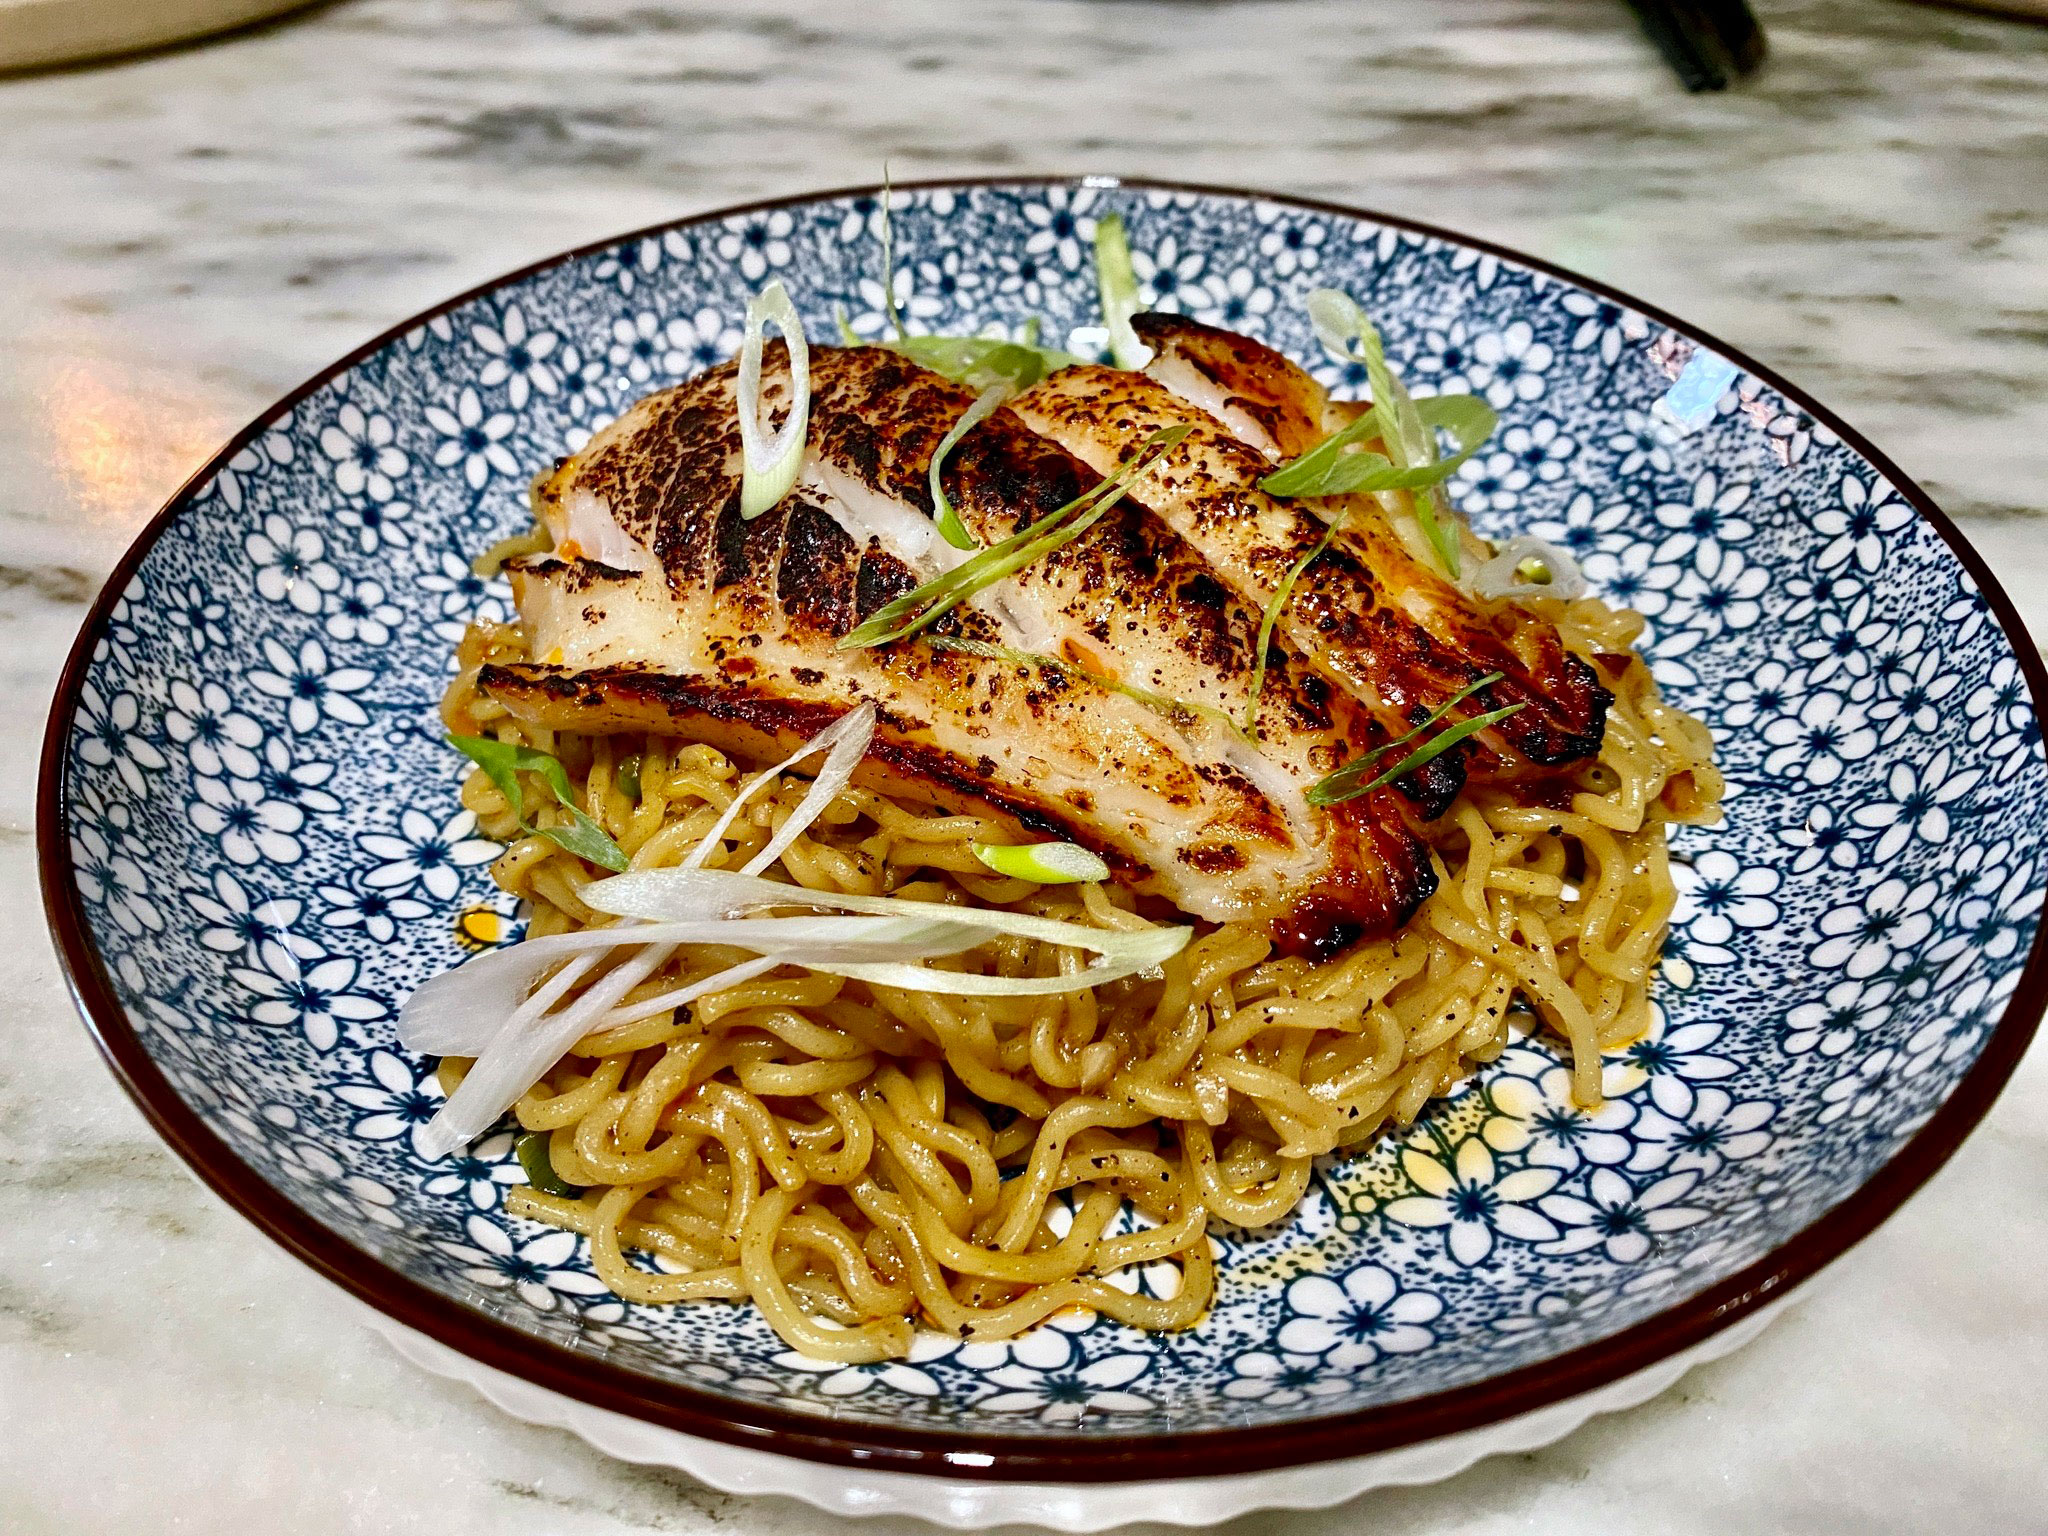 Miso Glazed Fish with Pan Fried Noodles, Scallions, Sweet Ginger Soy